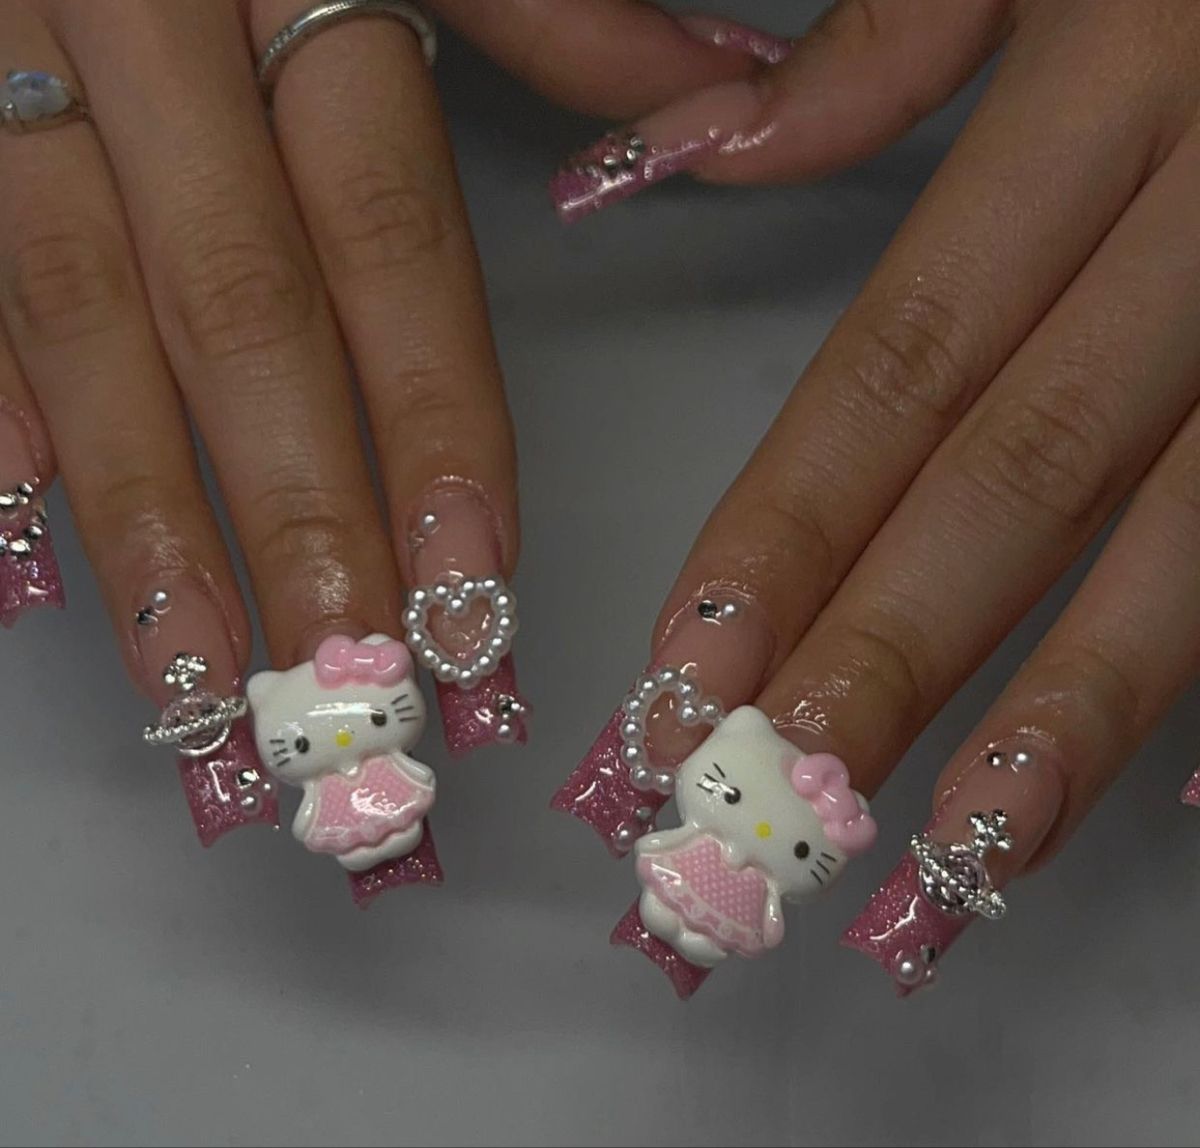 37style Sanrios Kuromi Hello Kitty My Melody Anime Y2k Europe and America Handmade Press on Nails Long Nails Design Manicure